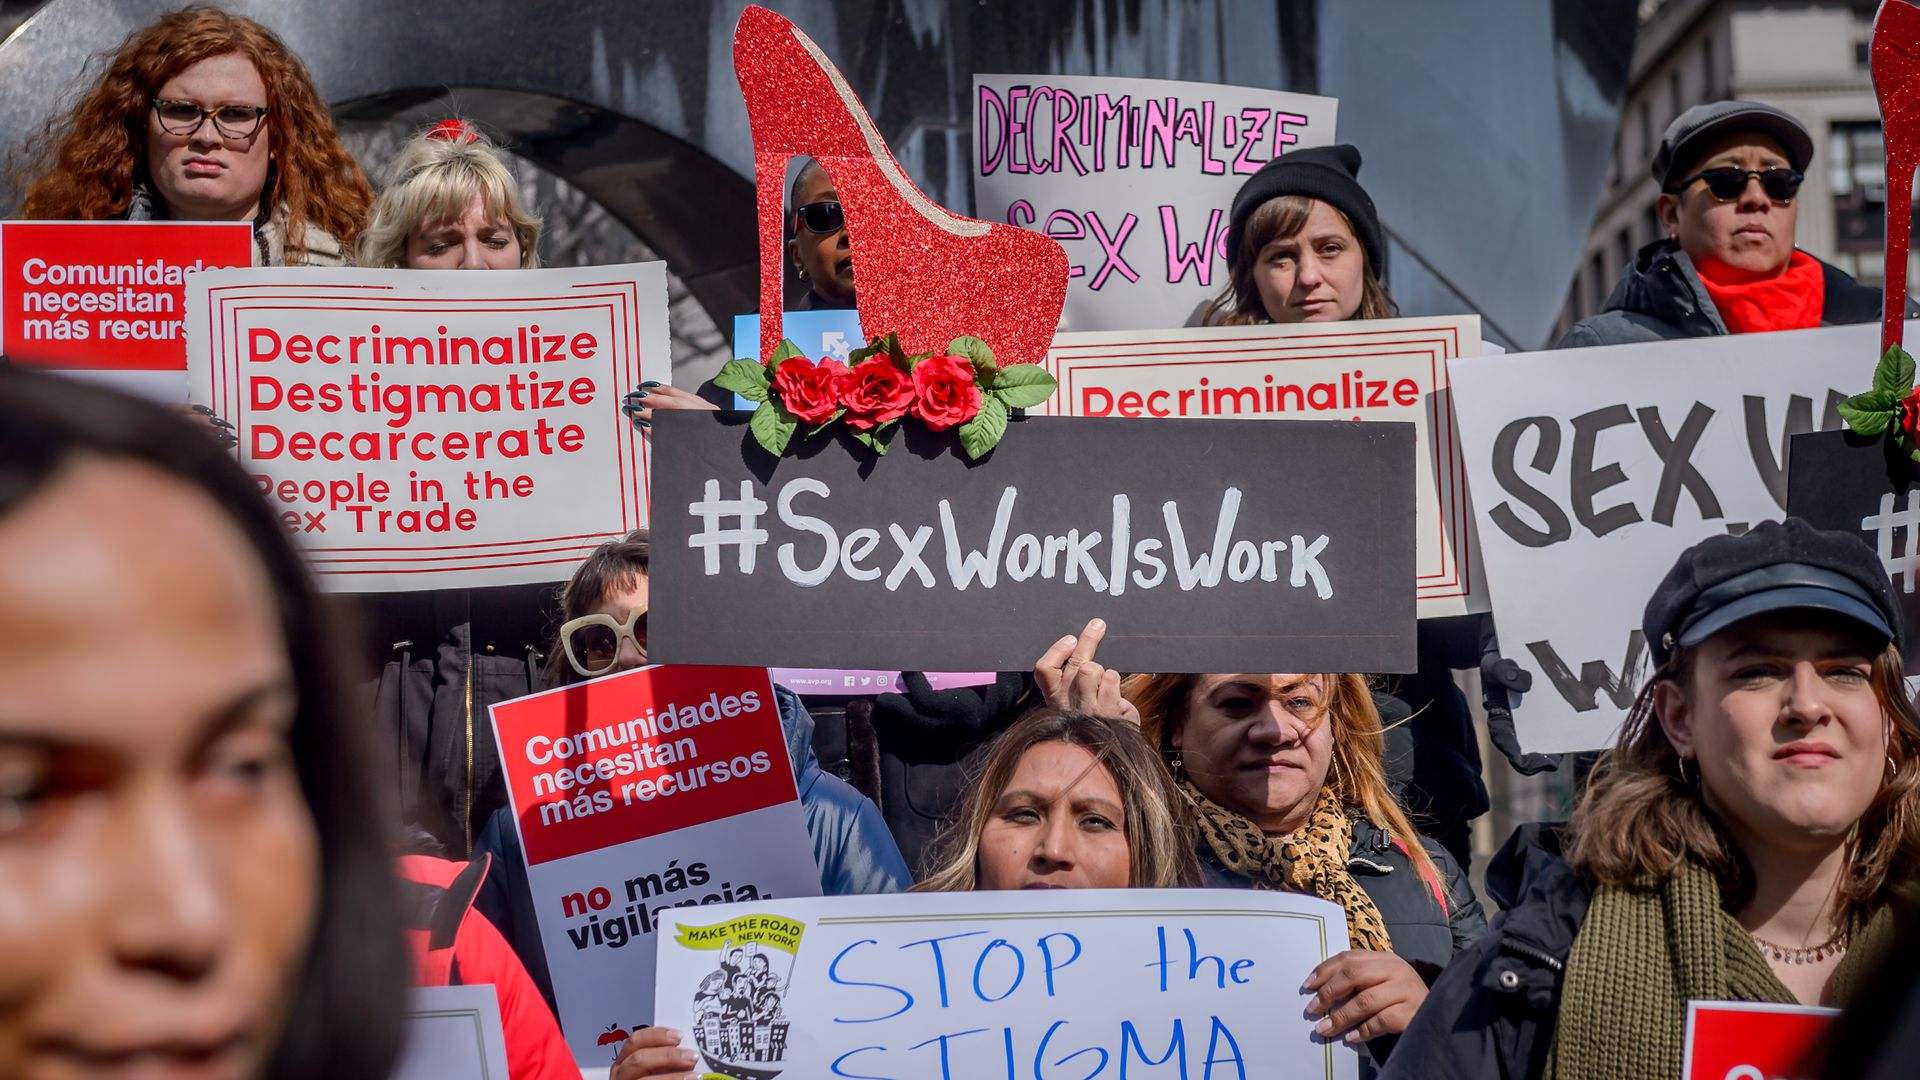 Picture of people carrying signs in support of decriminalizing sex work